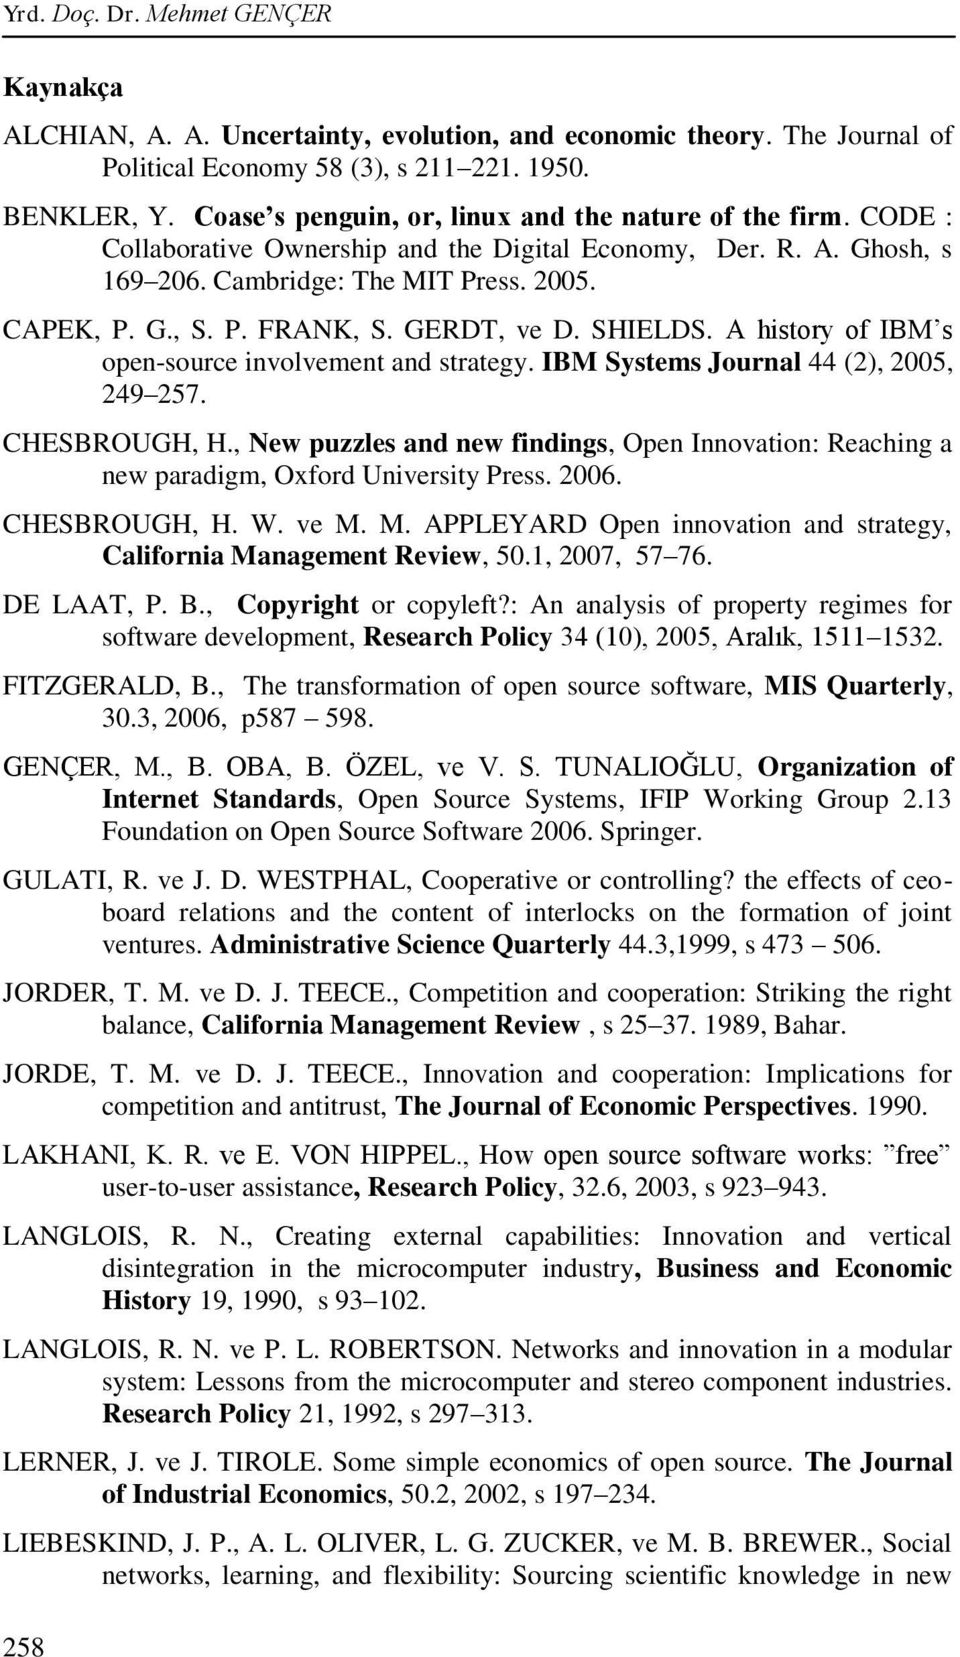 GERDT, ve D. SHIELDS. A history of IBM s open-source involvement and strategy. IBM Systems Journal 44 (2), 2005, 249 257. CHESBROUGH, H.